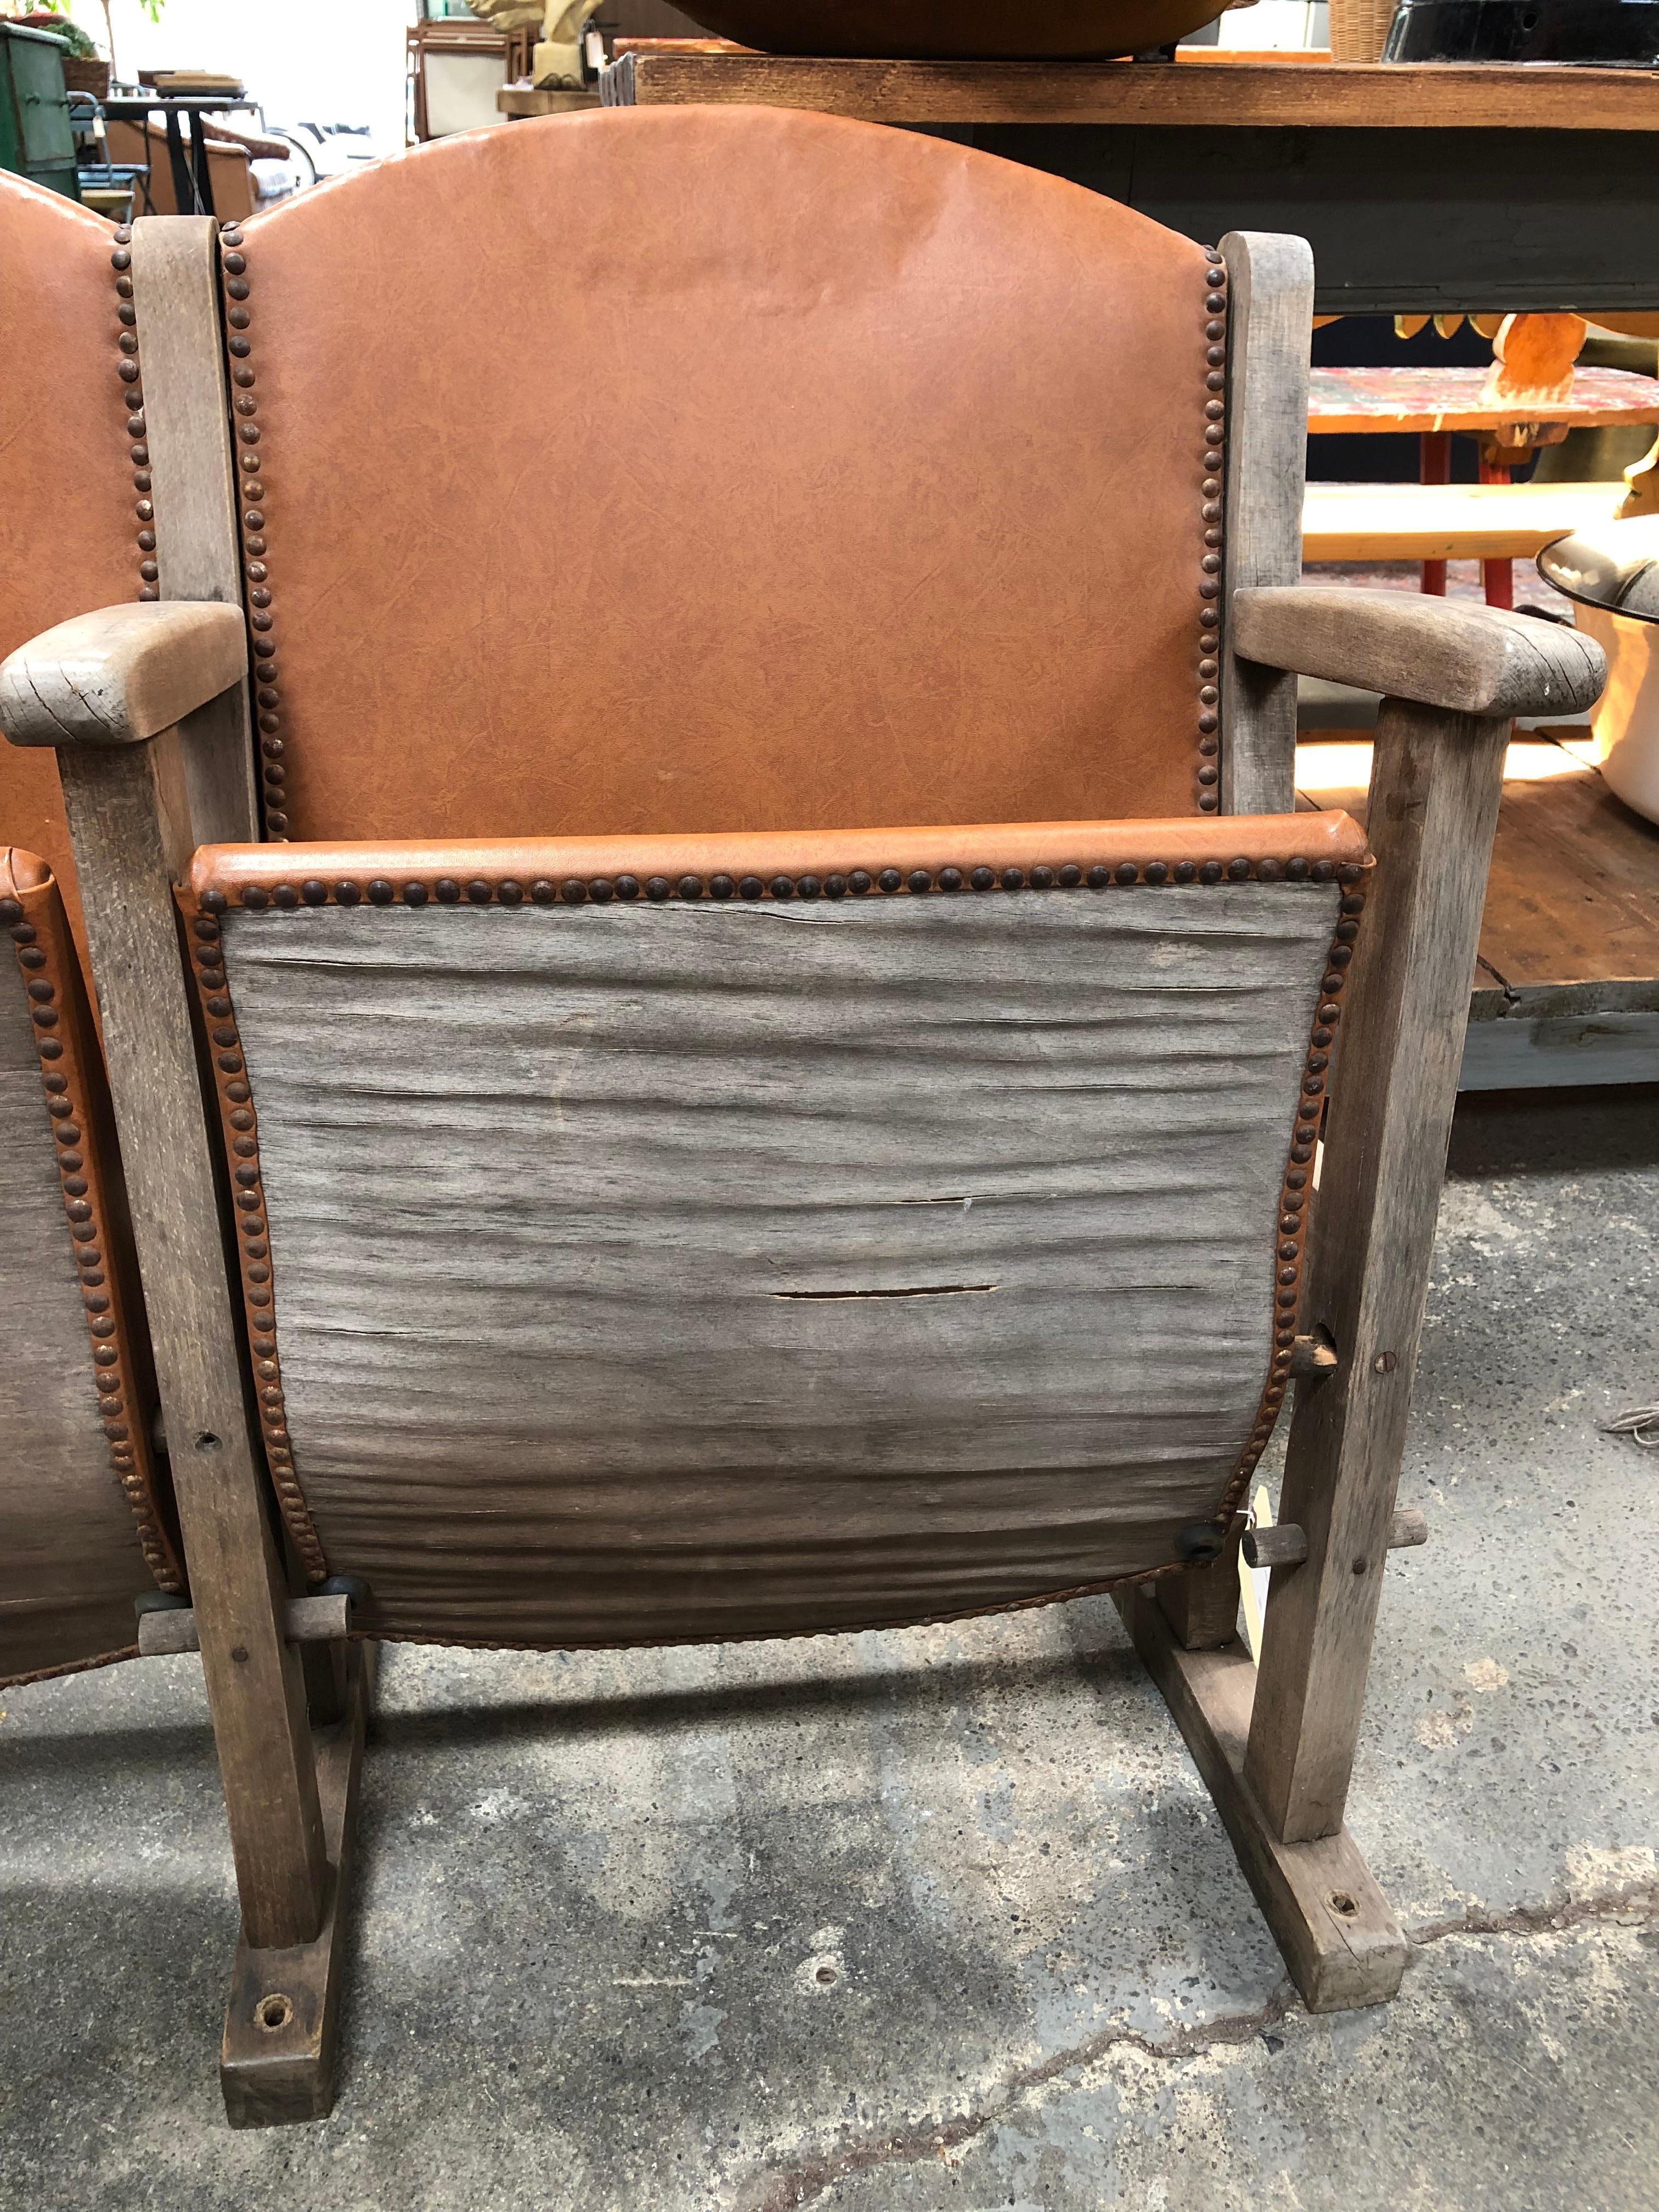 theater seats for sale